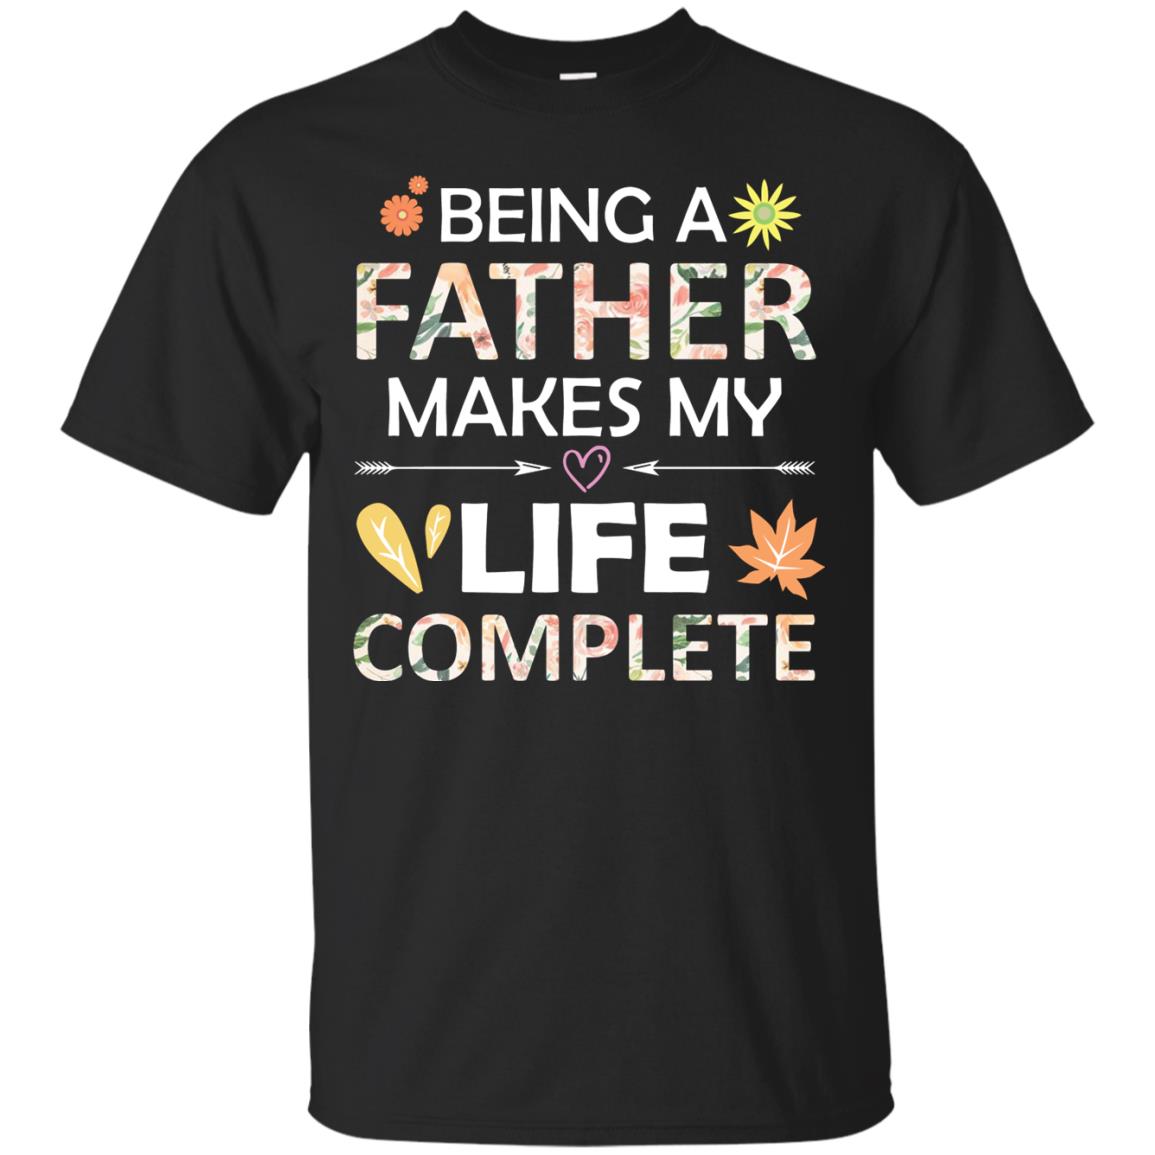 Being A Father Make My Life Complete Parent_s Day Shirt For DaddyG200 Gildan Ultra Cotton T-Shirt